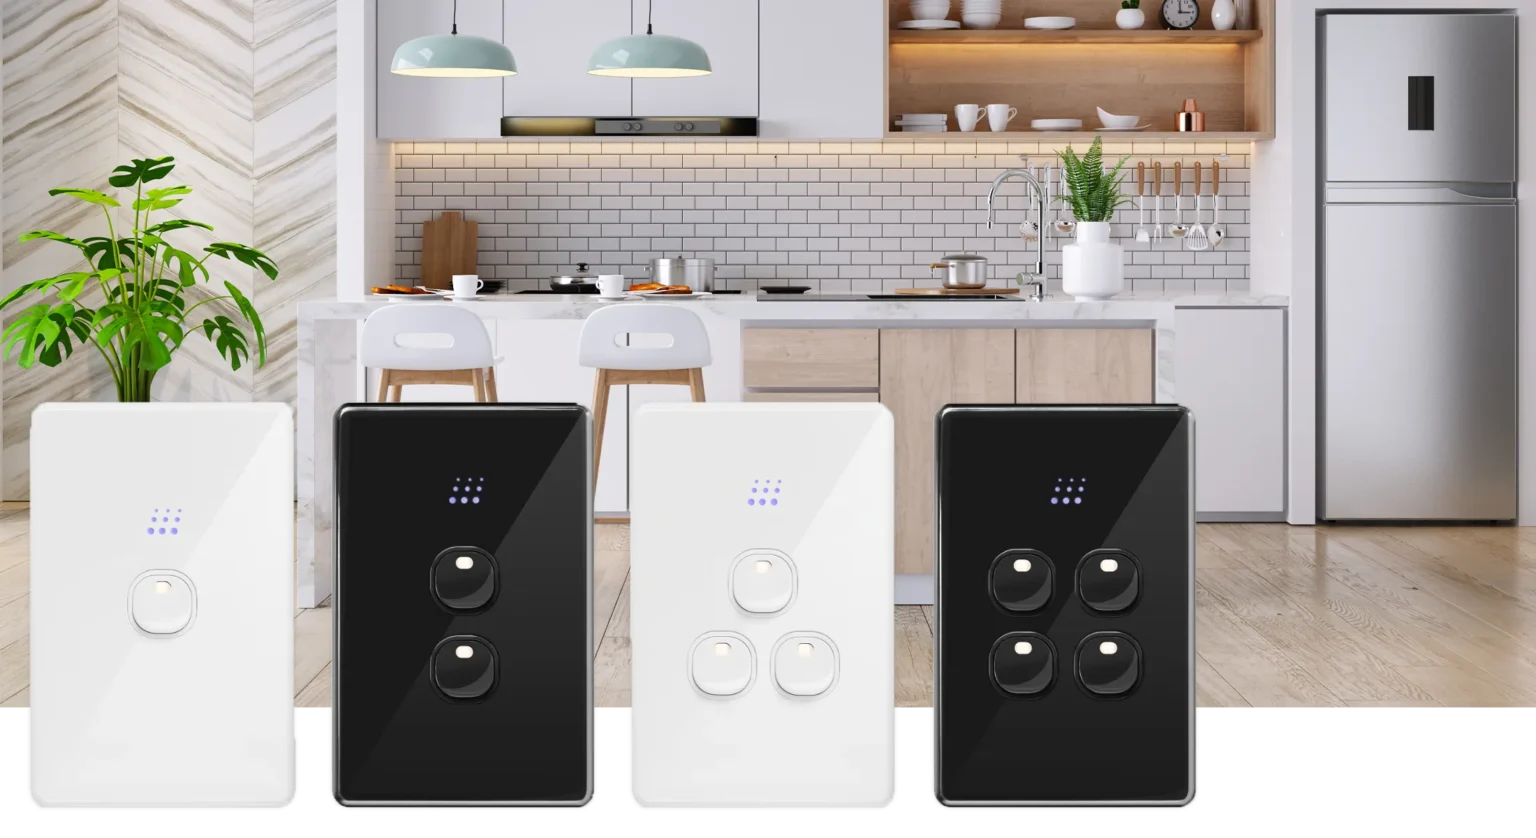 Home automation with multi purpose switches from Zimi.